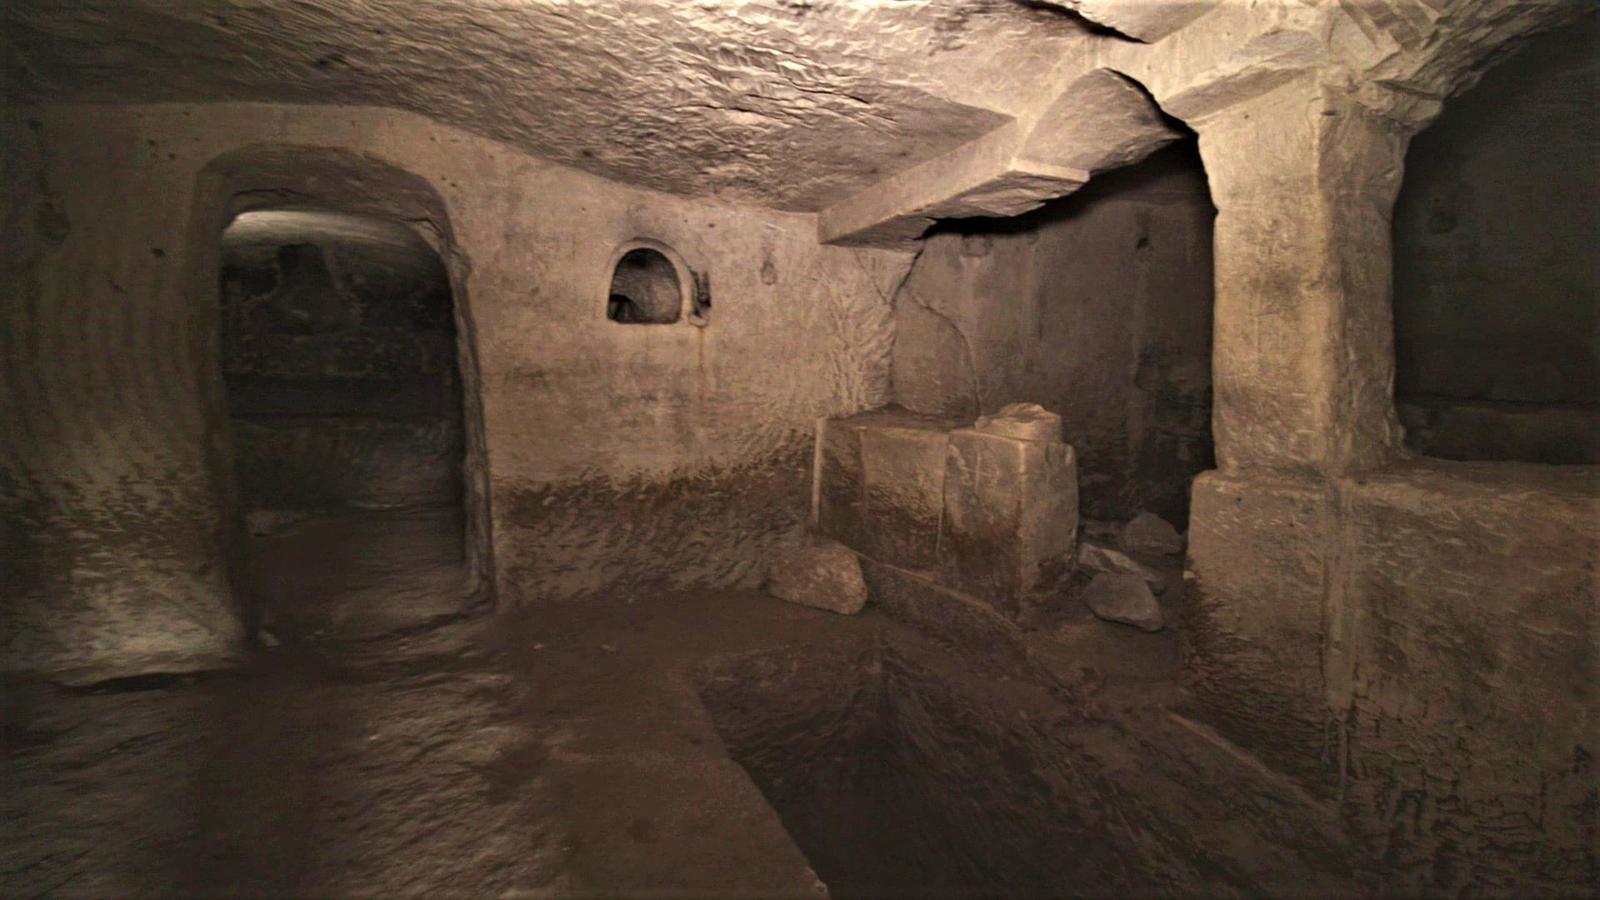 A photograph from the interior of the tomb of Salome. Image Credit: Israel Antiquities Authority.